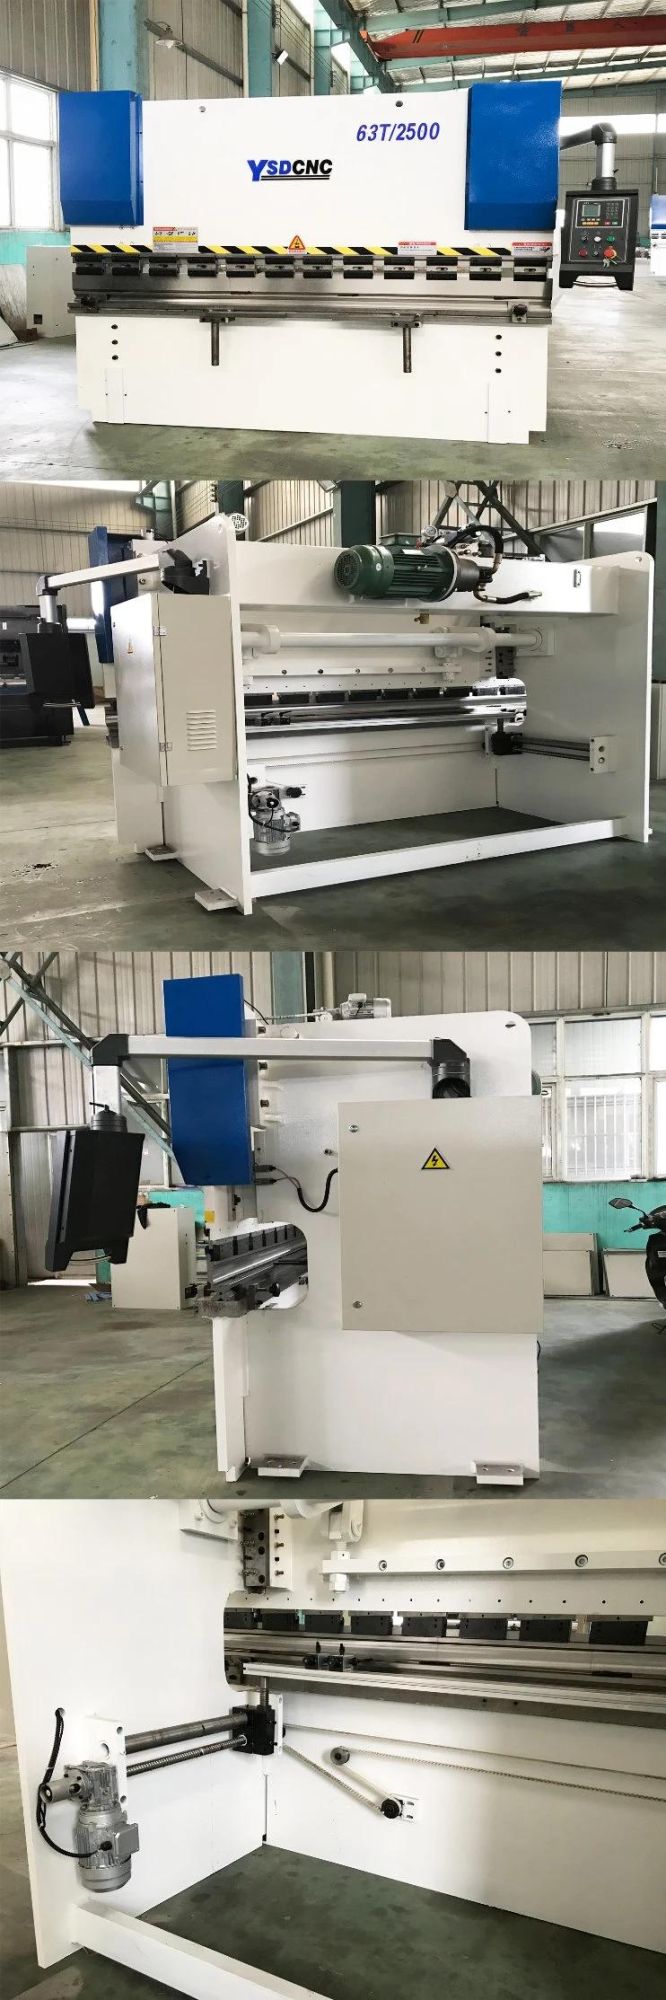 Nc Automatic Hydraulic Bending Machine for Sale